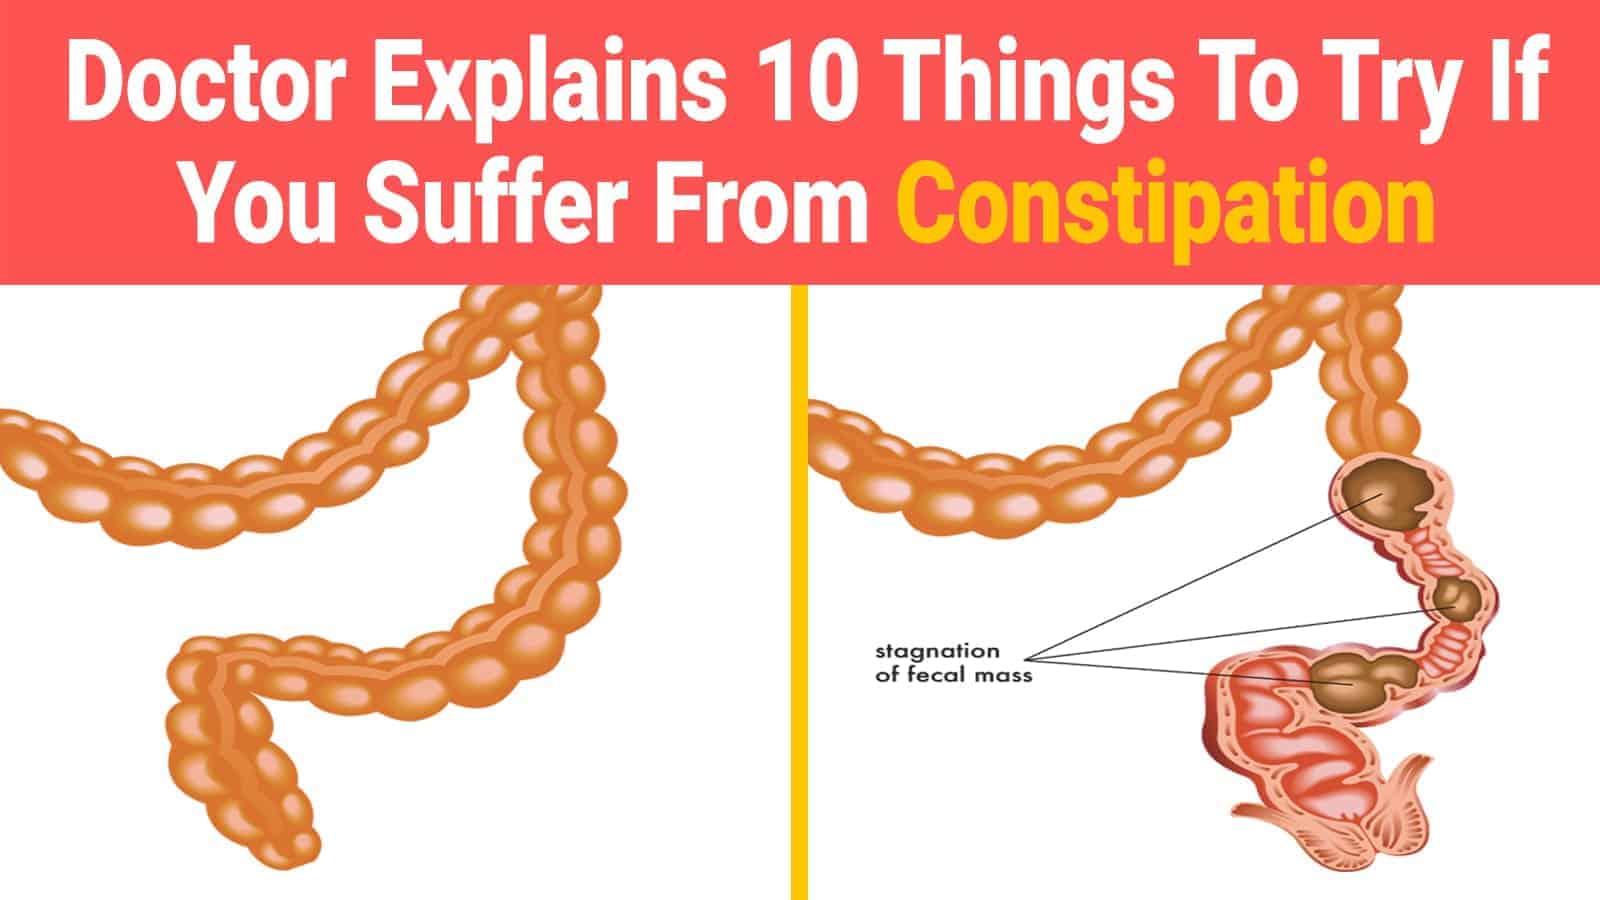 Doctor Explains 10 Things To Try If You Suffer From Constipation